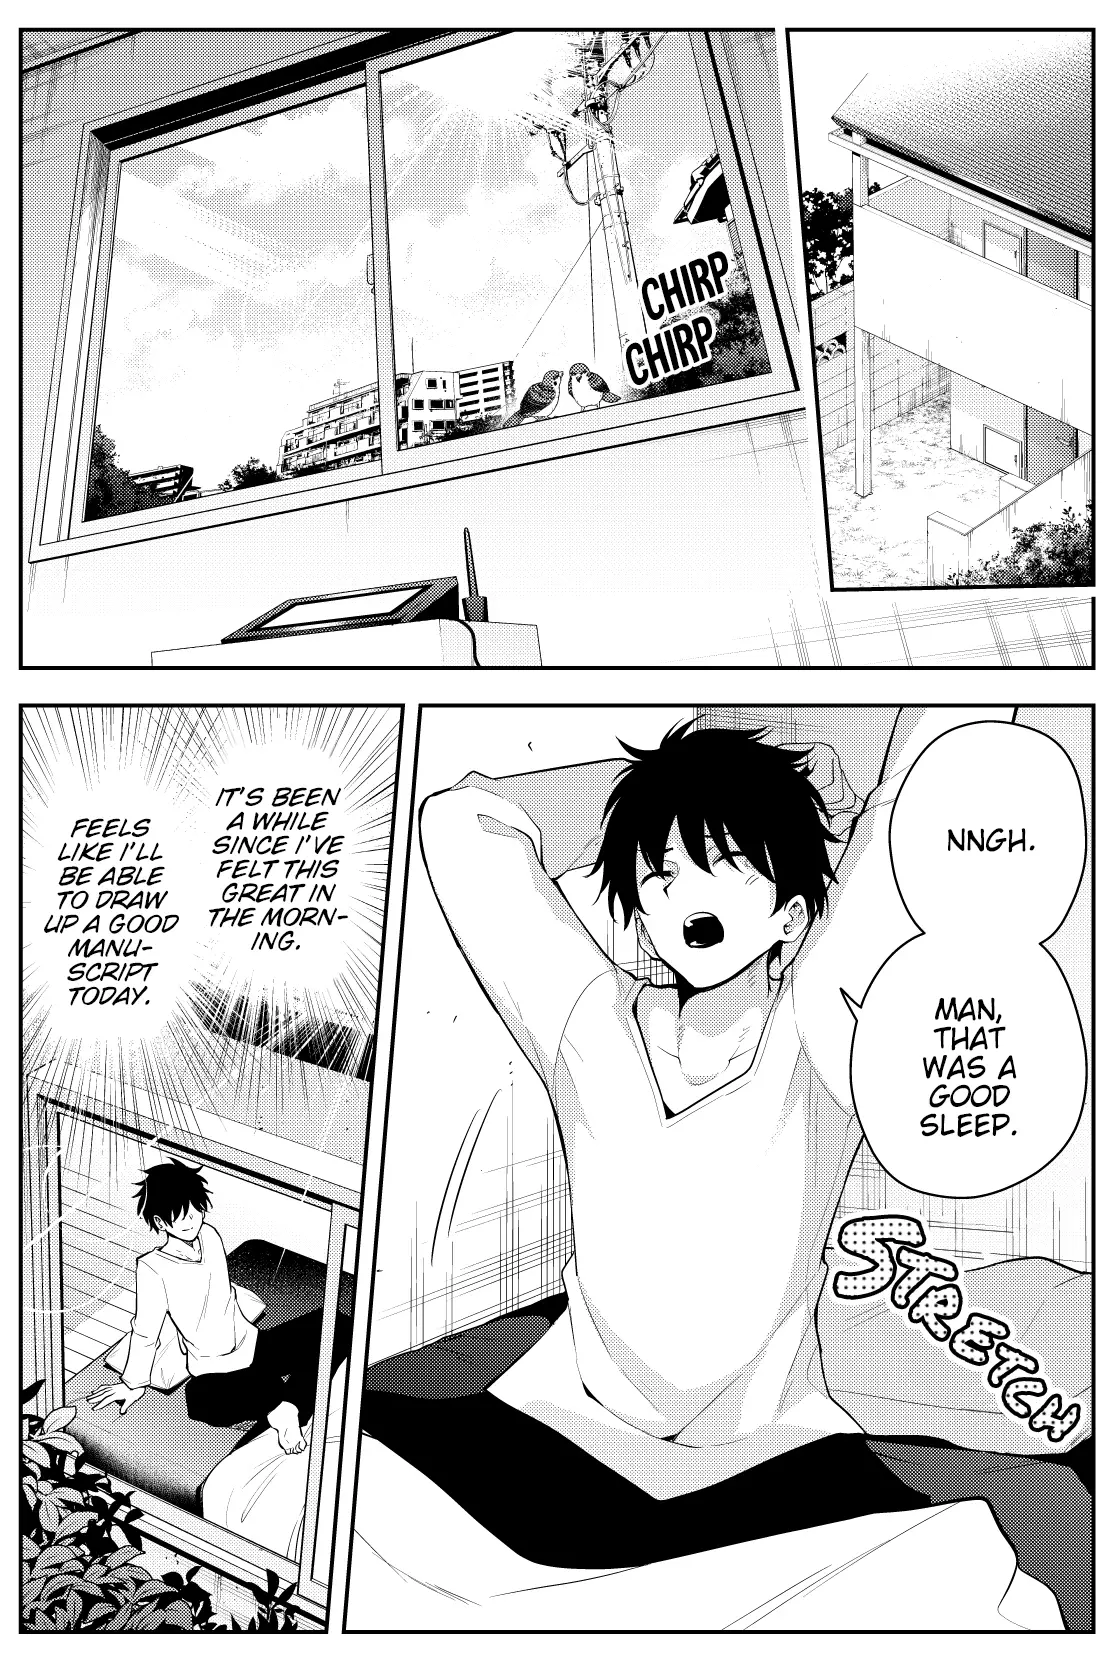 The Story Of A Manga Artist Confined By A Strange High School Girl - 32 page 1-0898a083